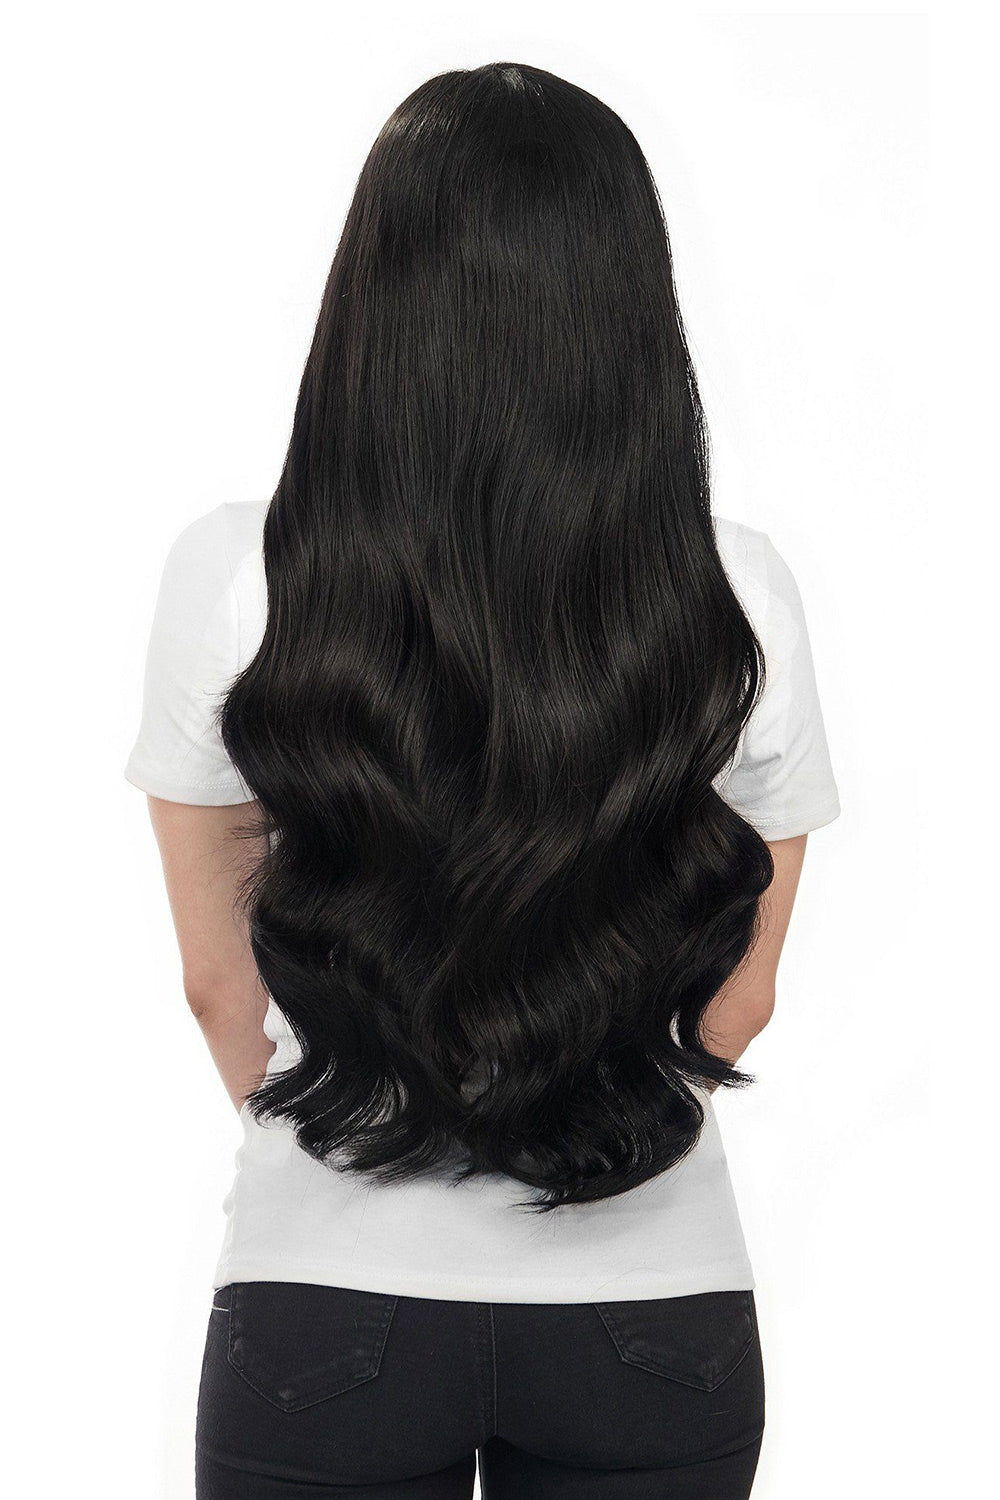 Micro Ring Human Hair Body Wave Extensions For Black Hair